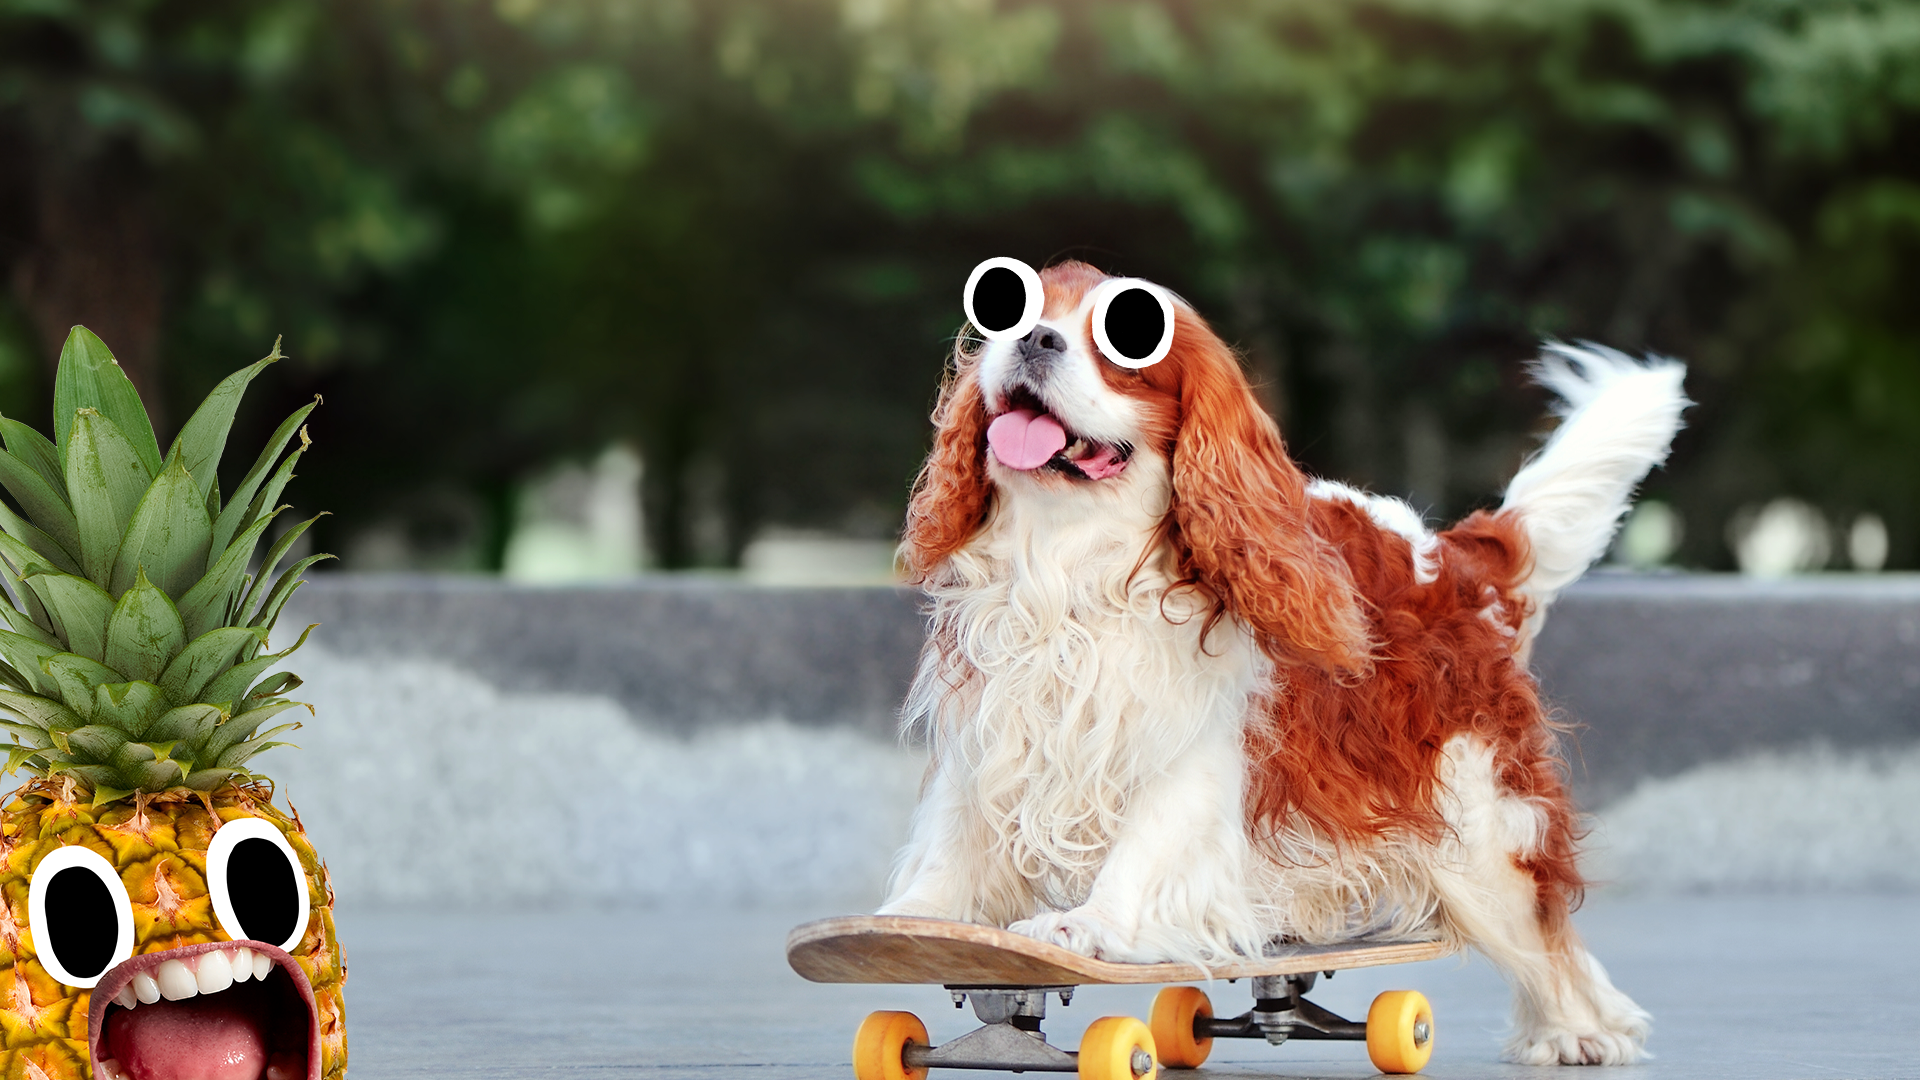 Dog on skateboard  with pineapple 